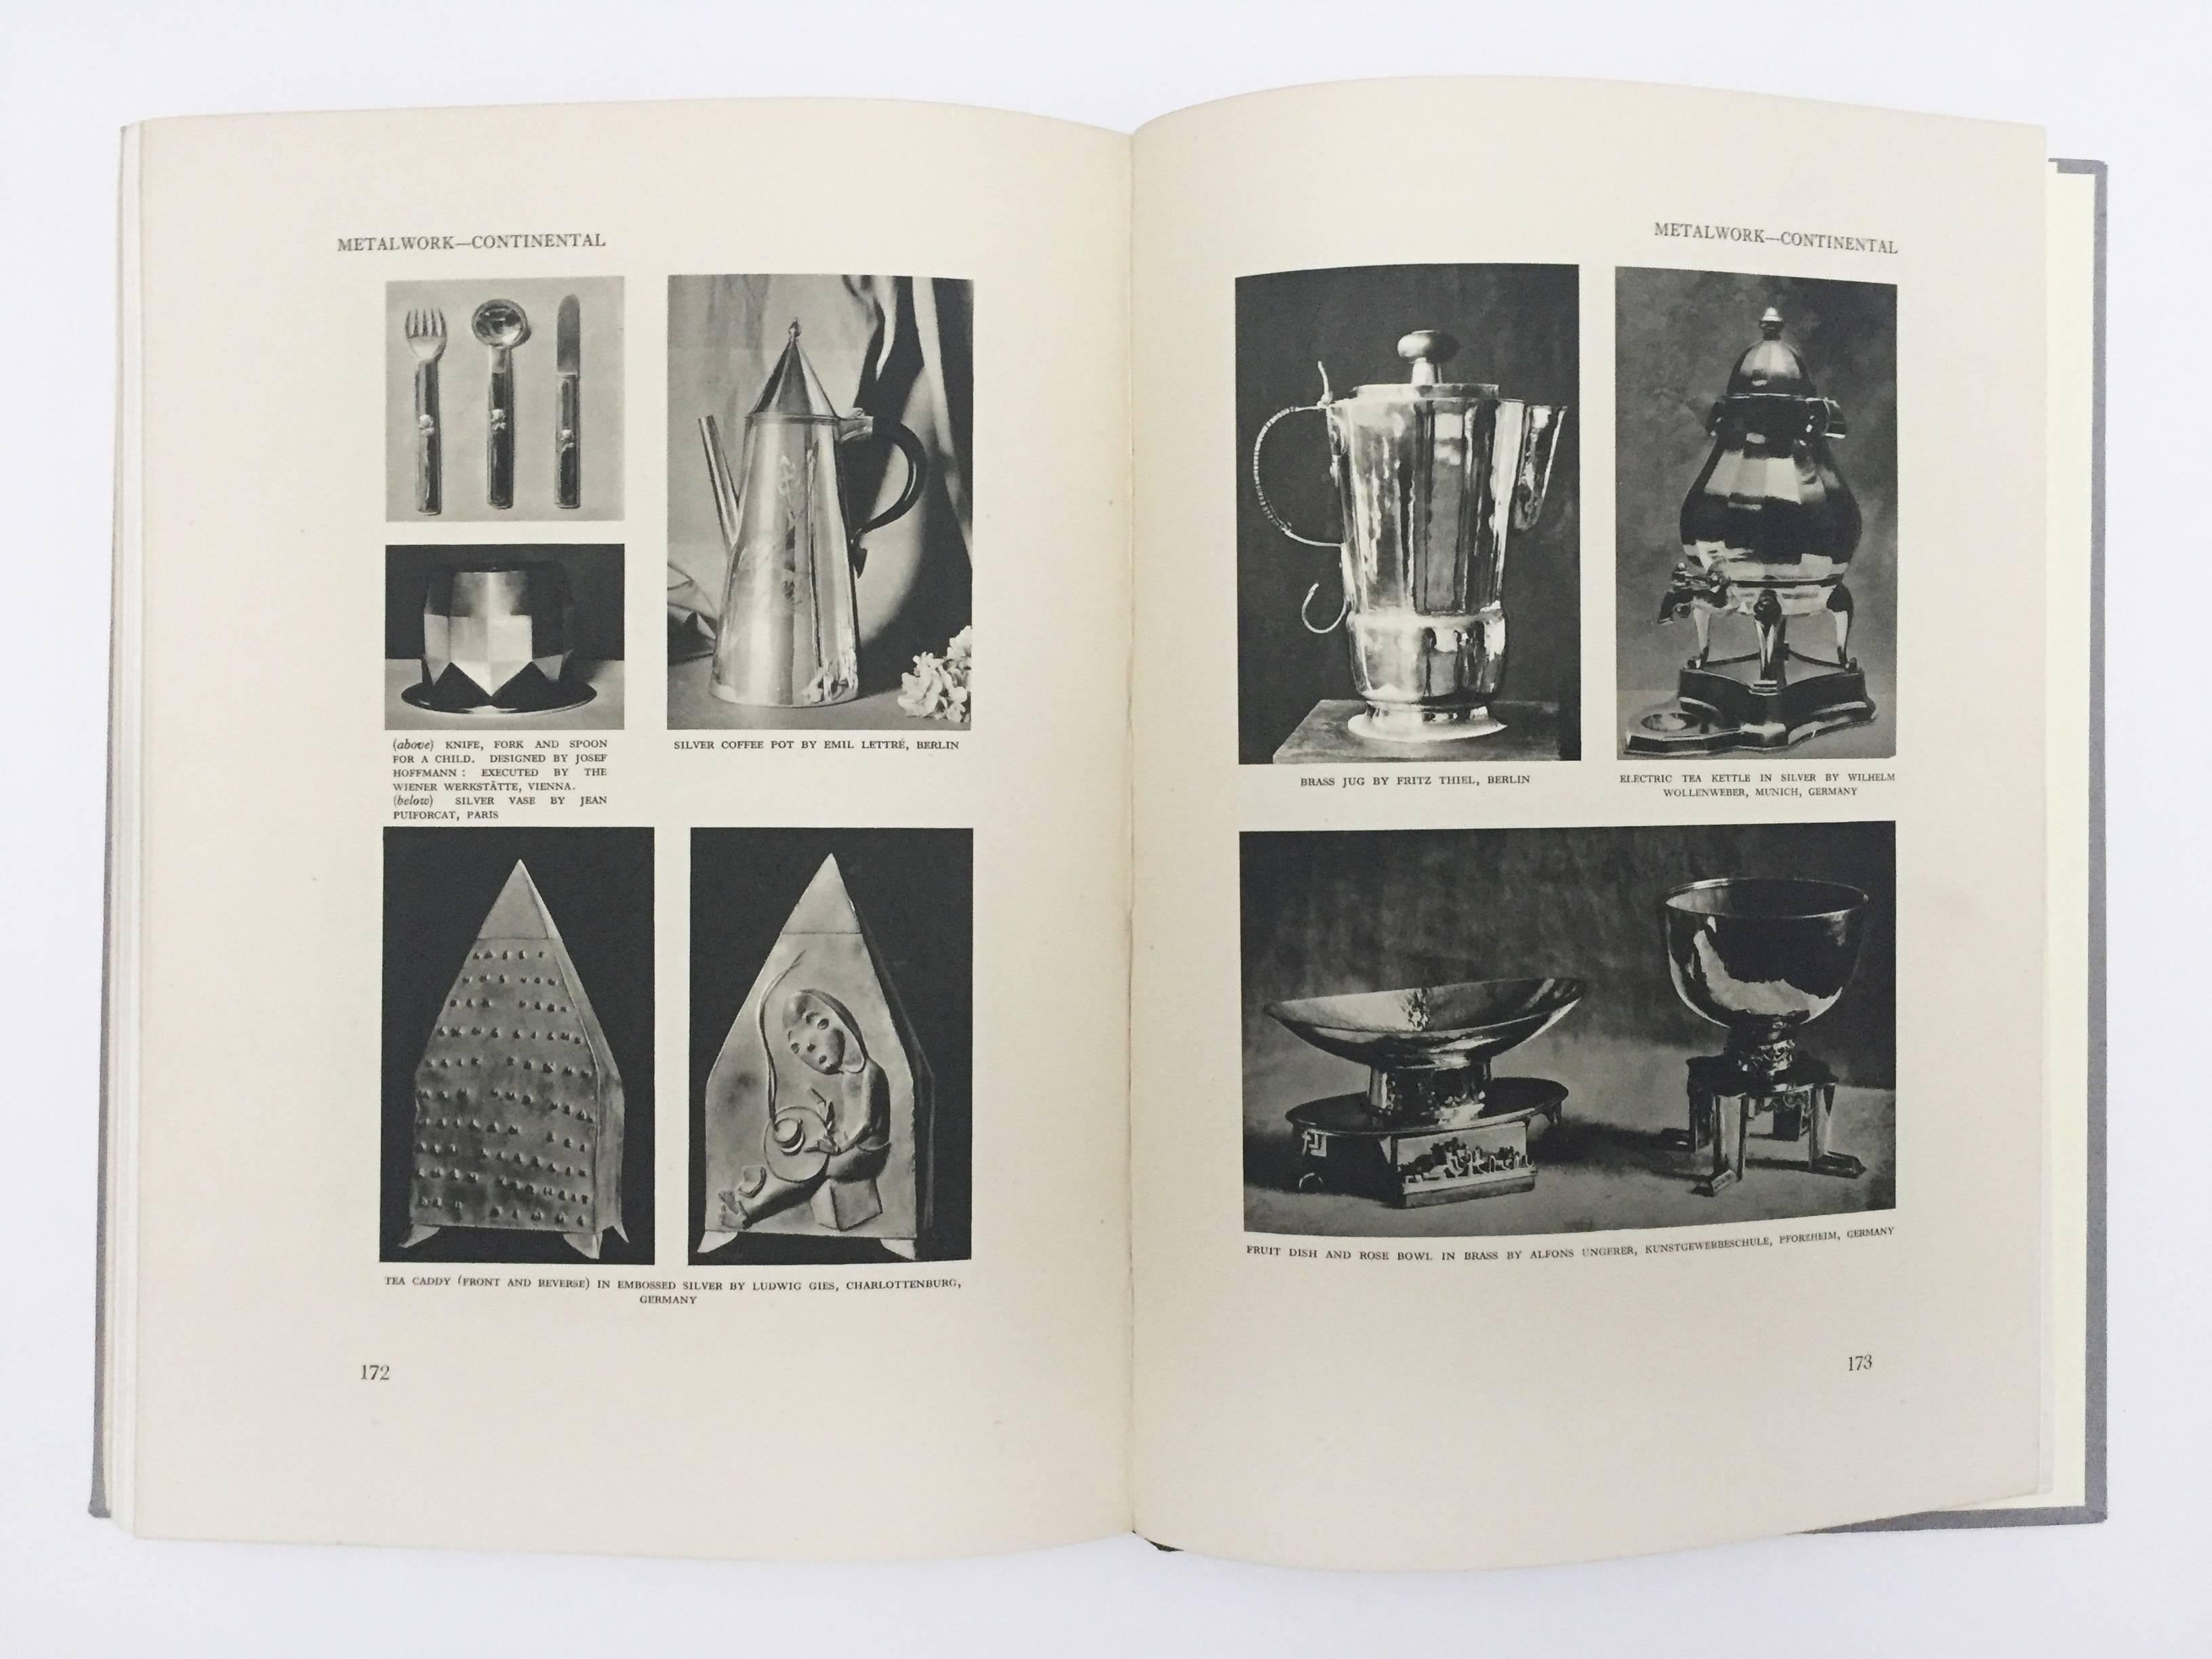 First edition published in 1928 by Studio Books.

A brilliant survey of decorative art from the year 1928, featuring several different sections ranging from architecture to furniture. This book highlights the mutually important aspects of design;